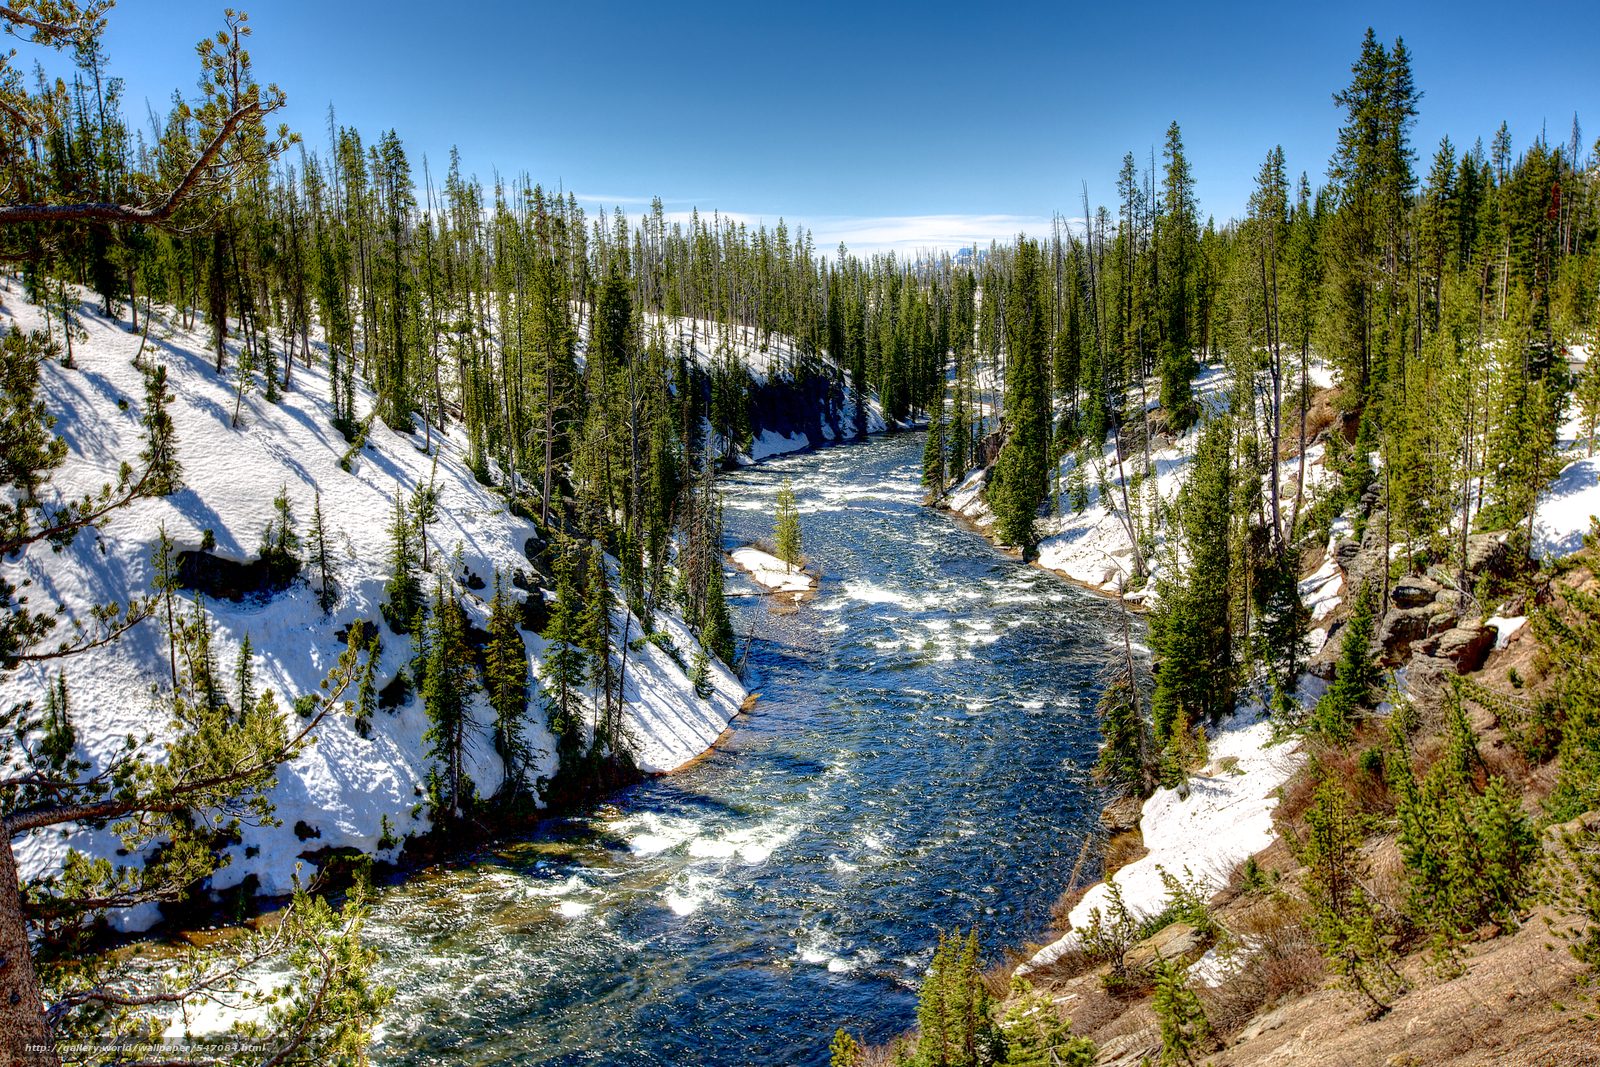 Download wallpaper Yellowstone National Park river trees landscape